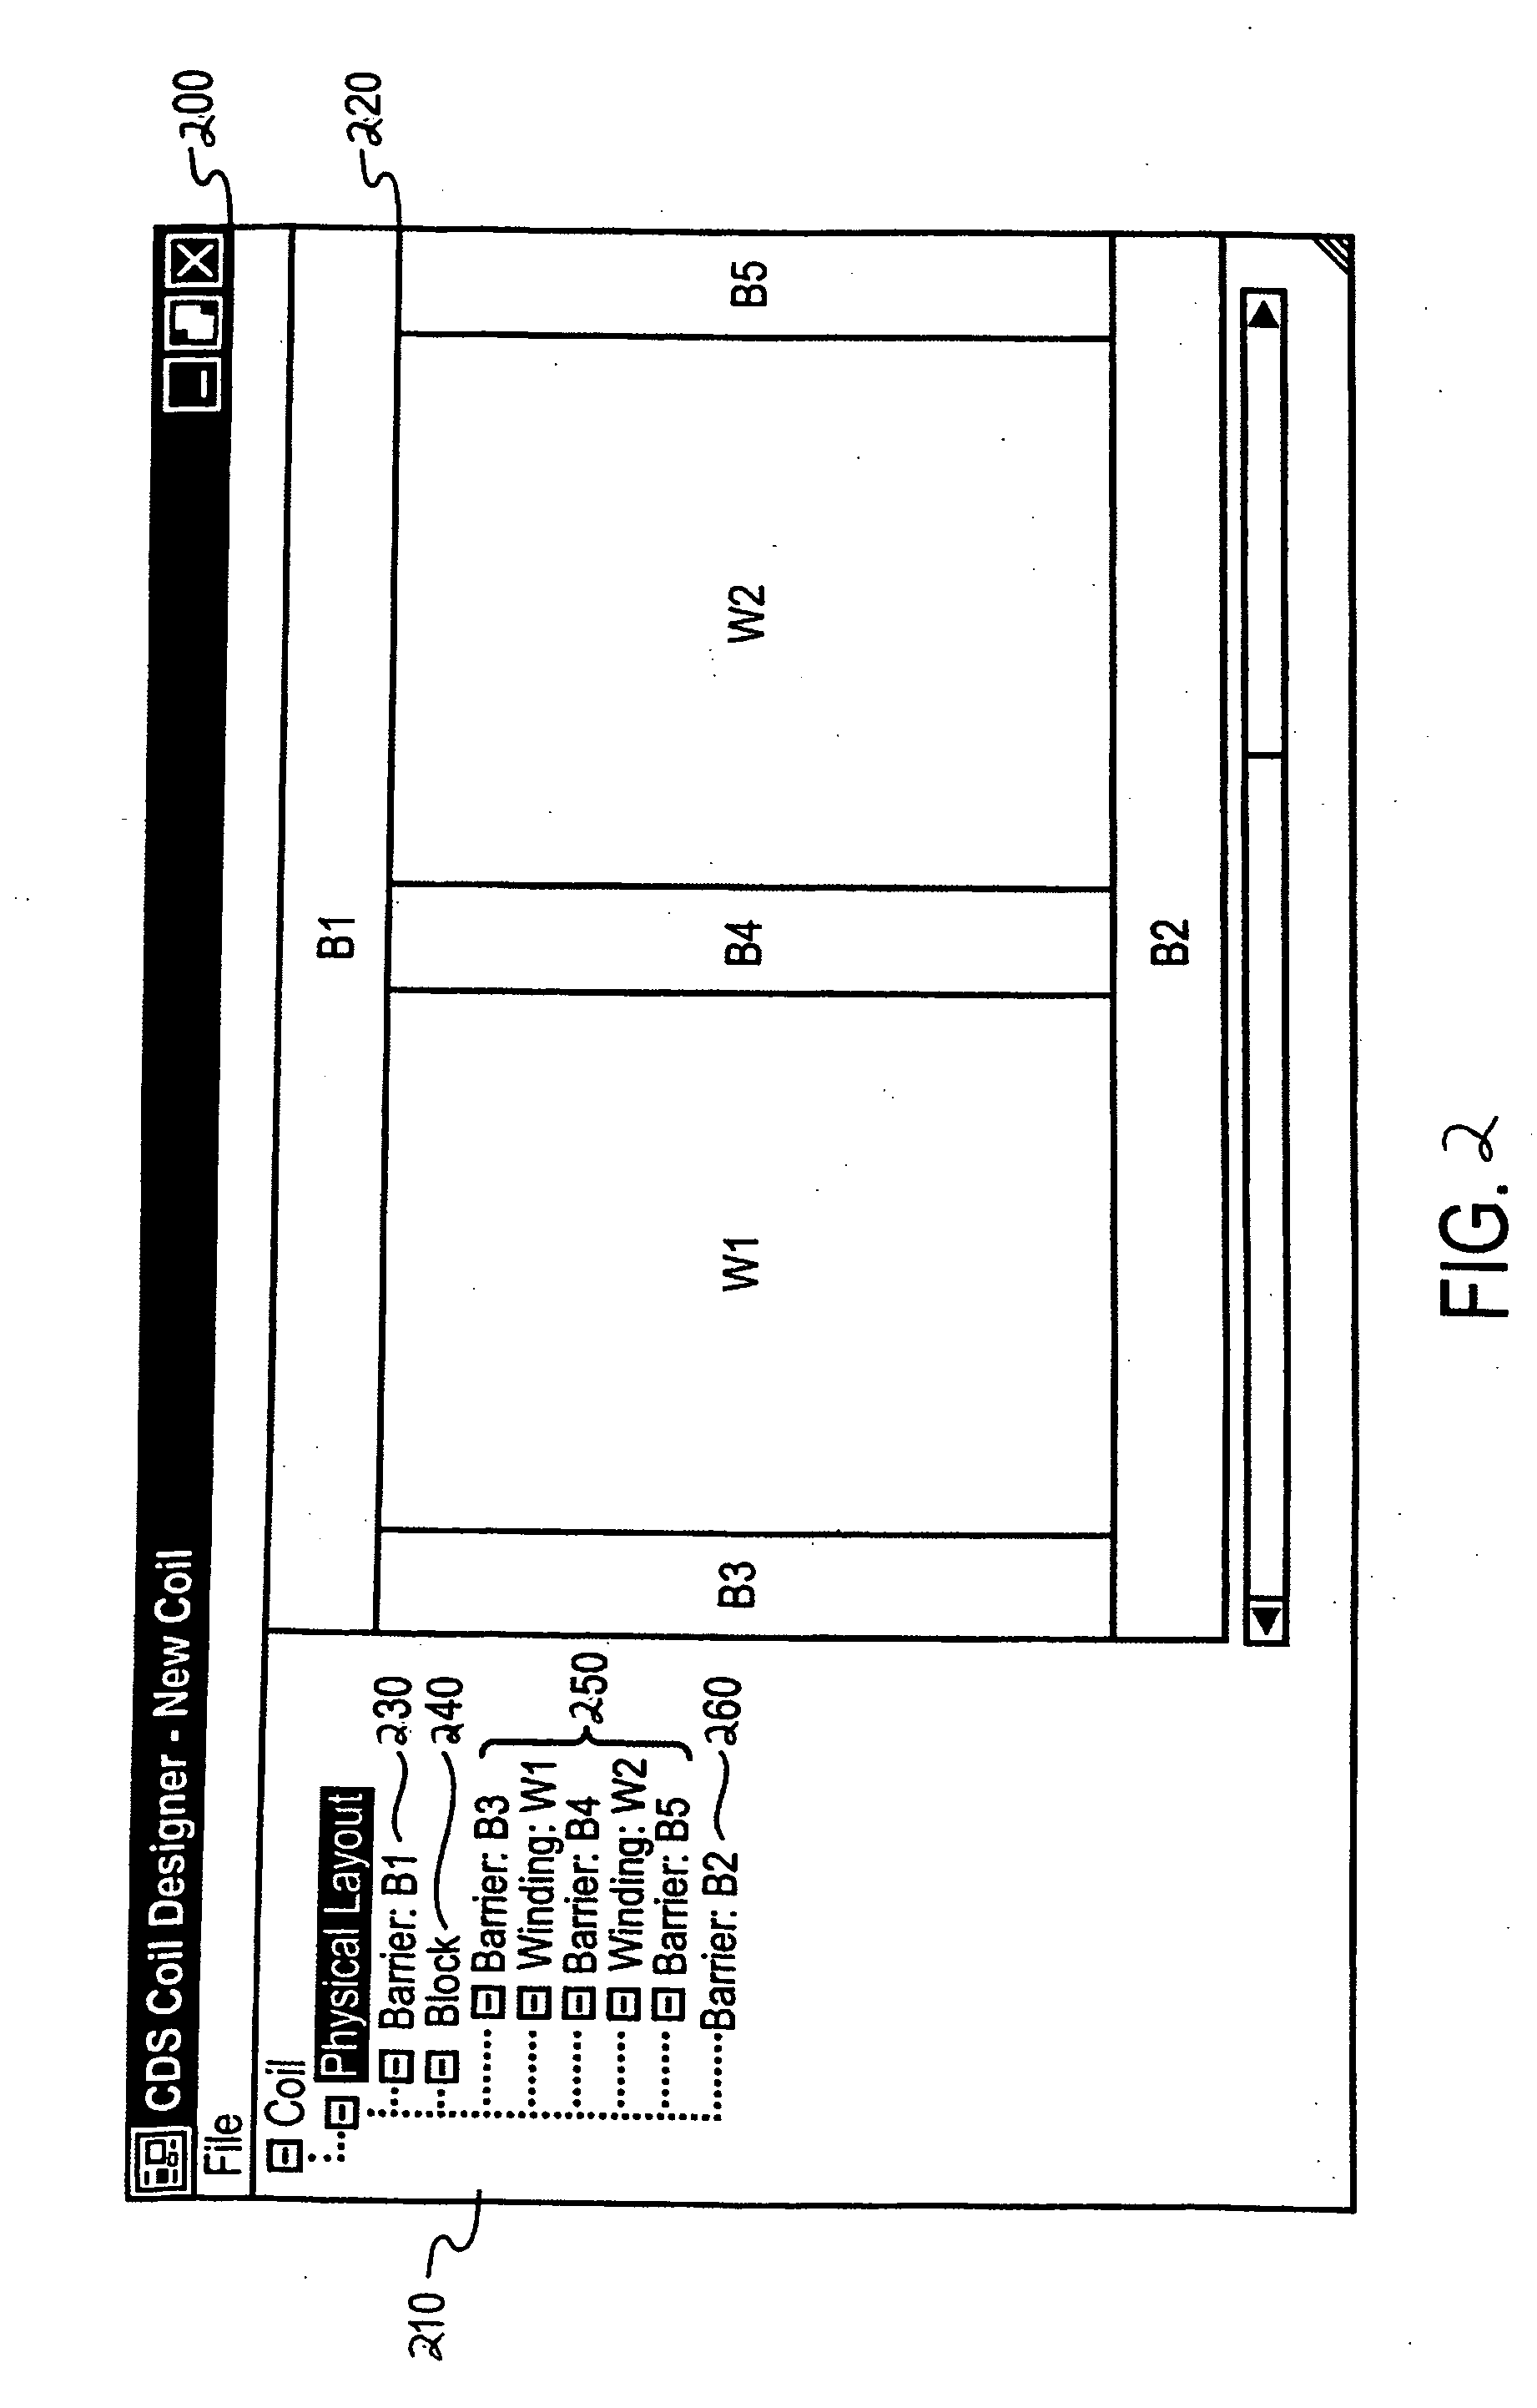 Automated method and tool for documenting a transformer design